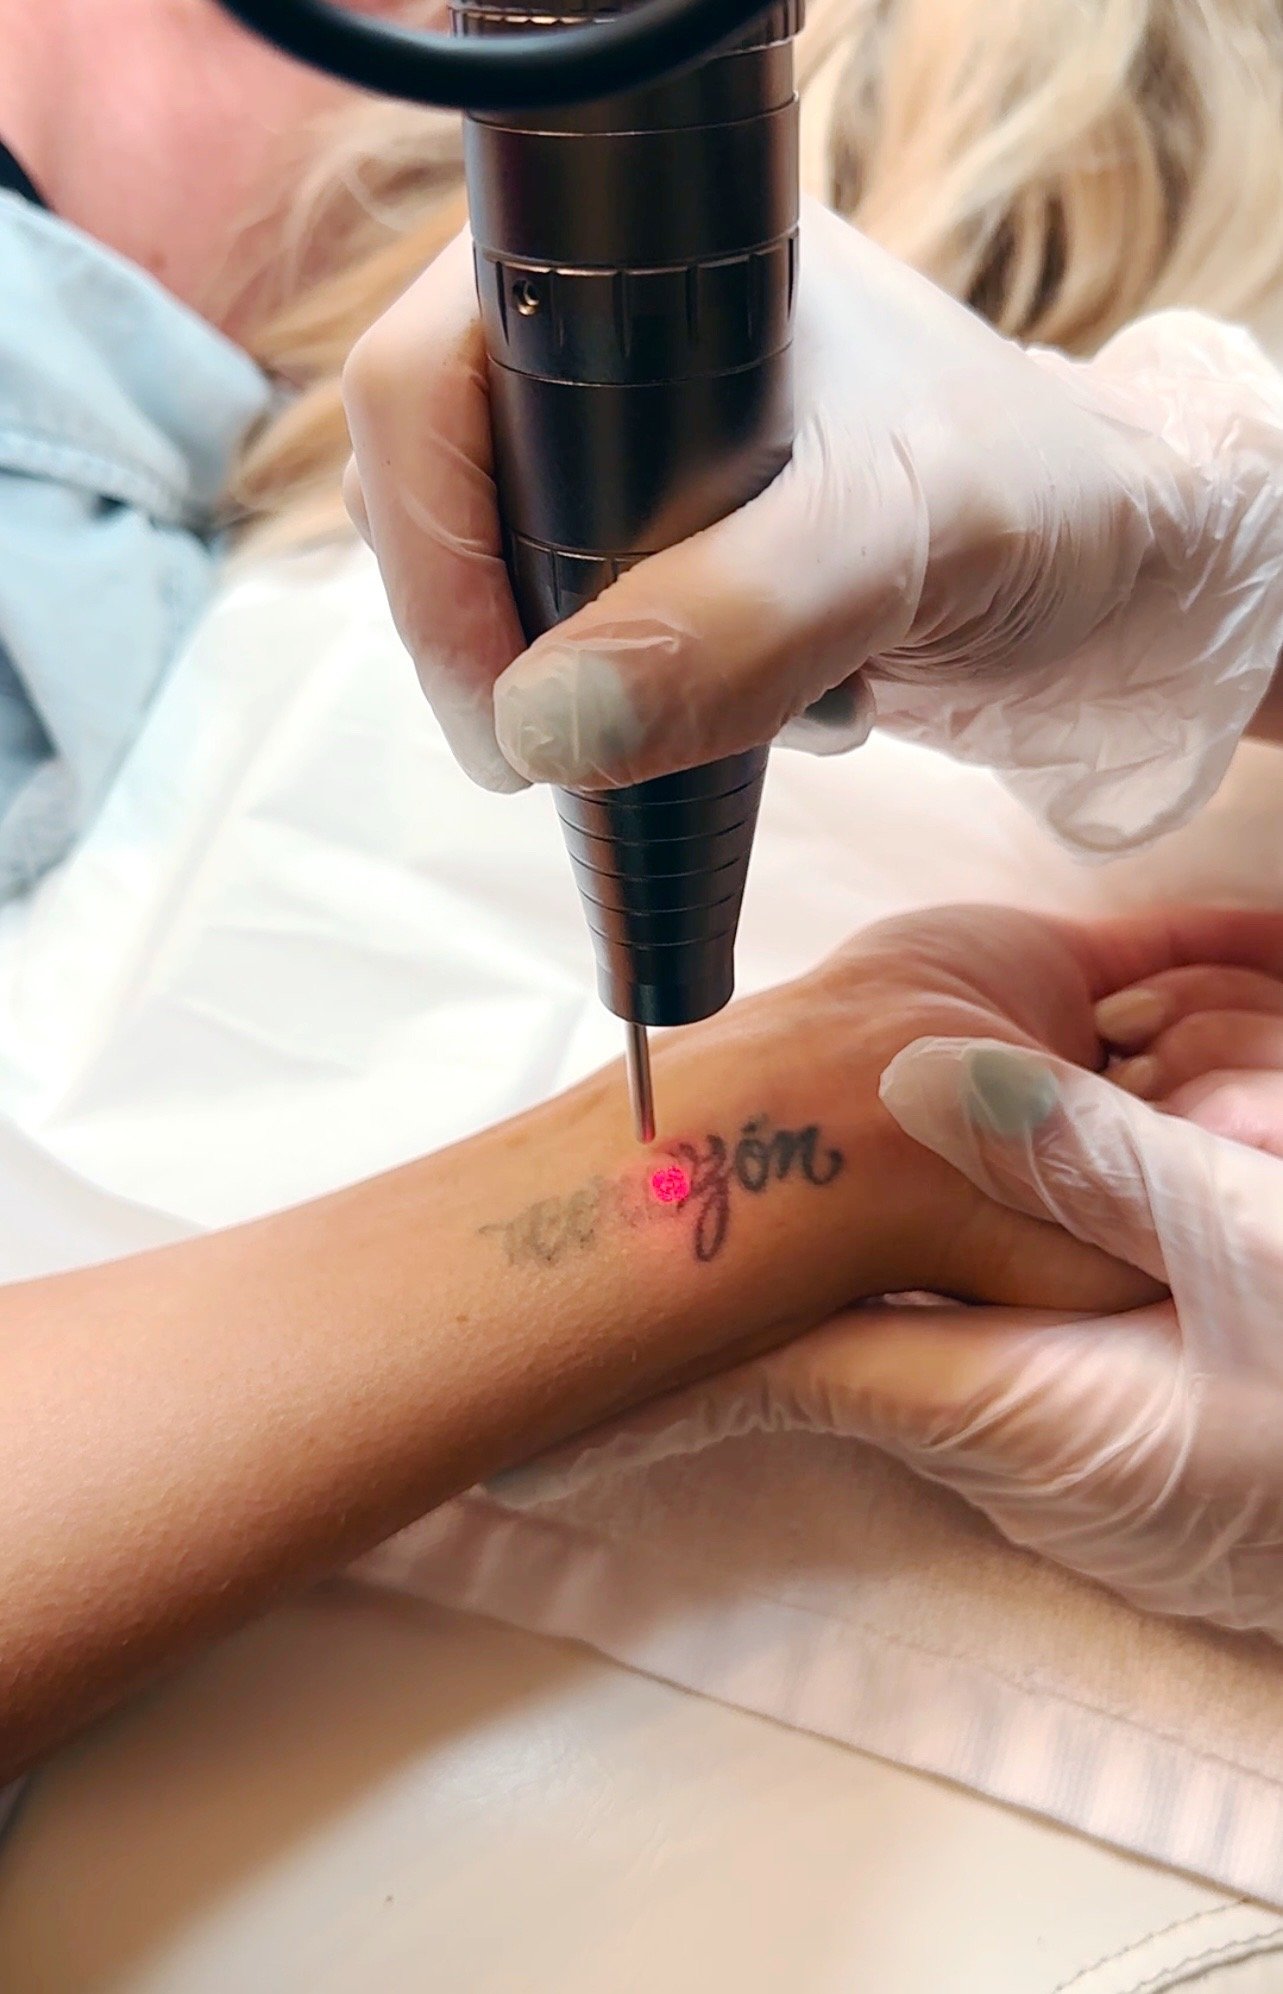 Tattoo Removal Perth | Quality removal of all tattoo types